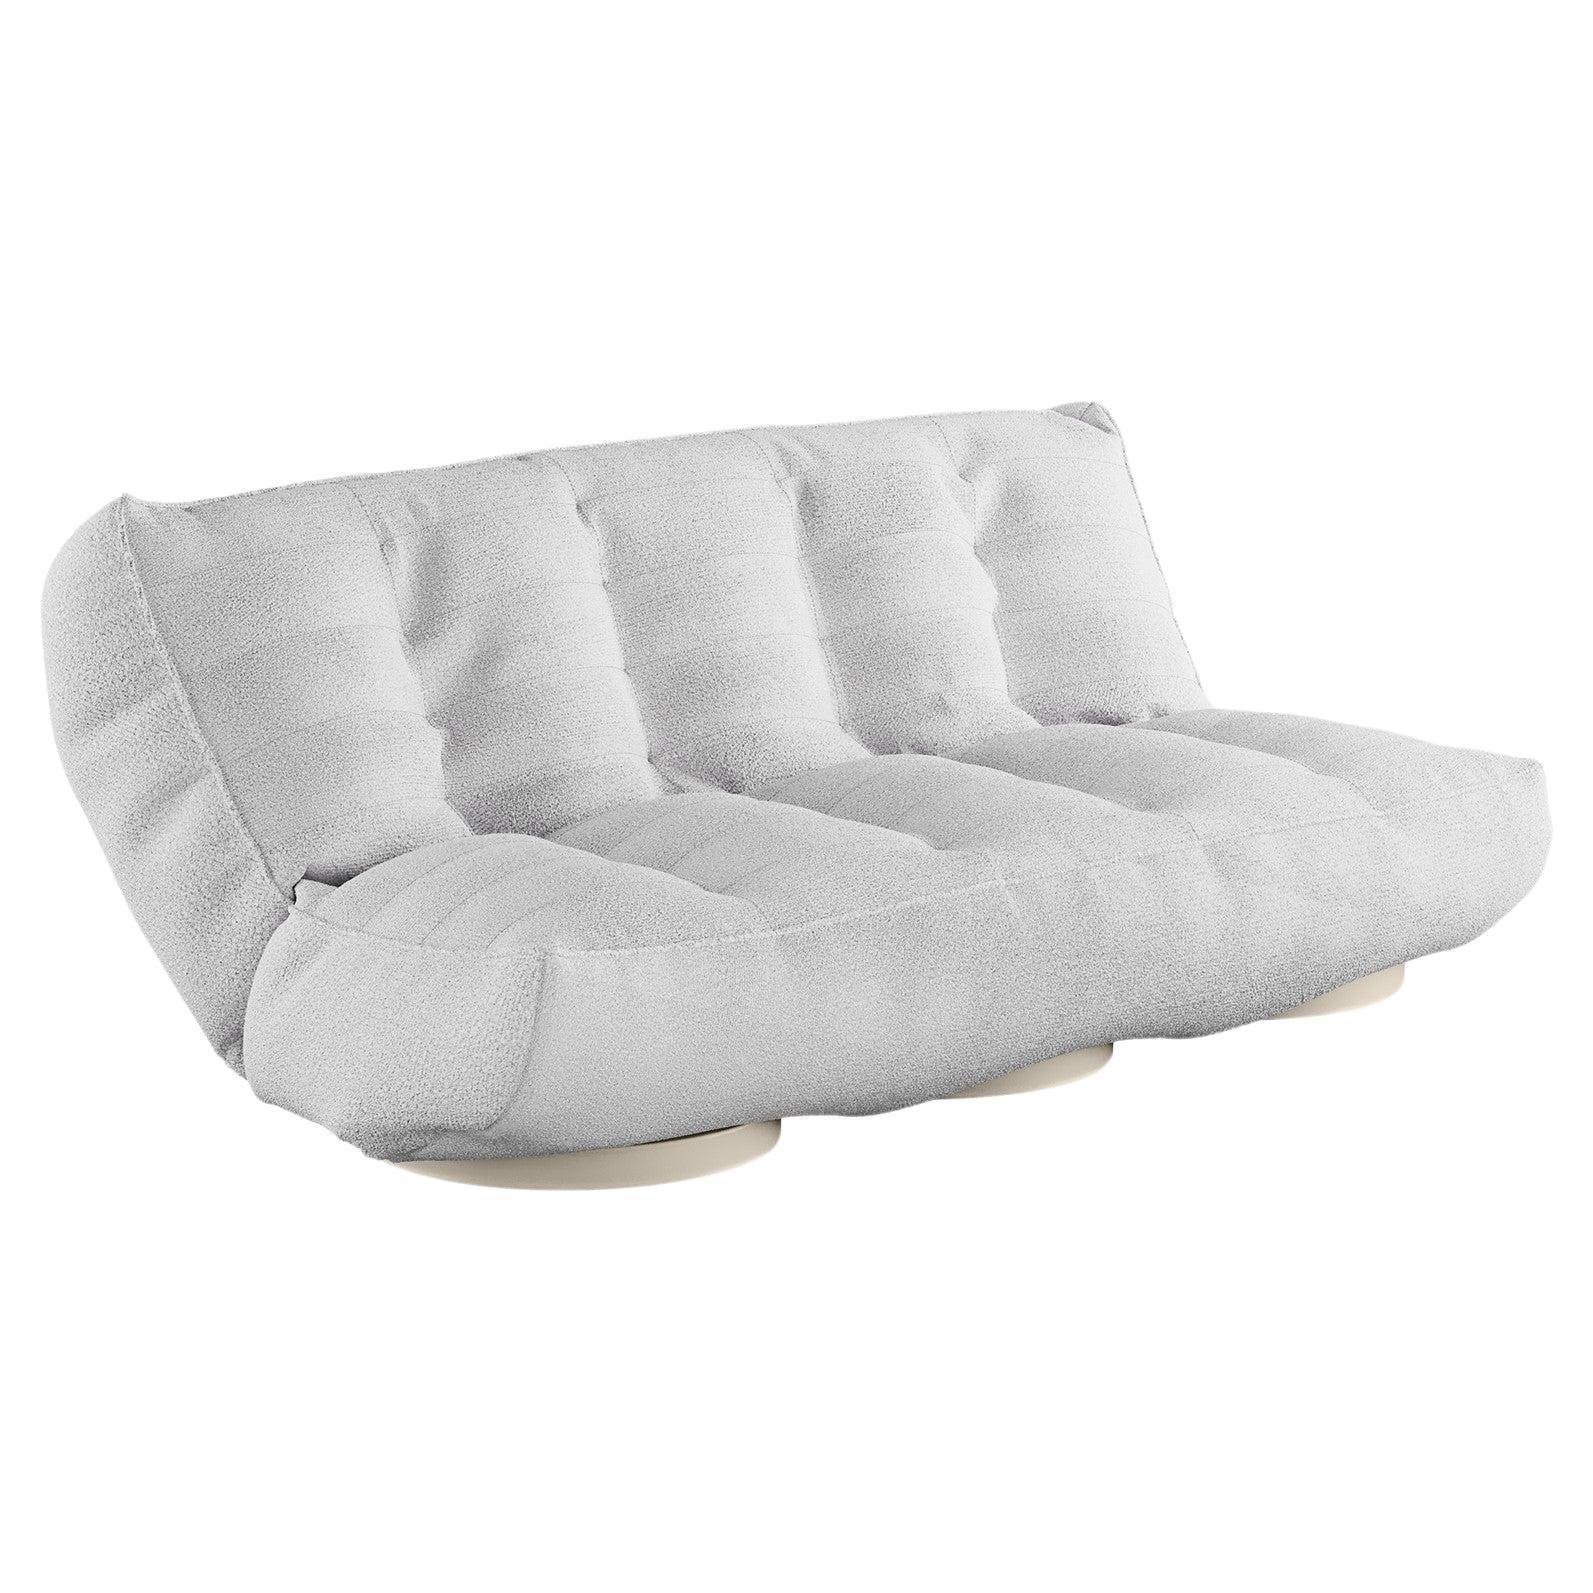 Modern Outdoor Sofa Folding White Daybed Upholstered in Sand Outdoor Fabric For Sale